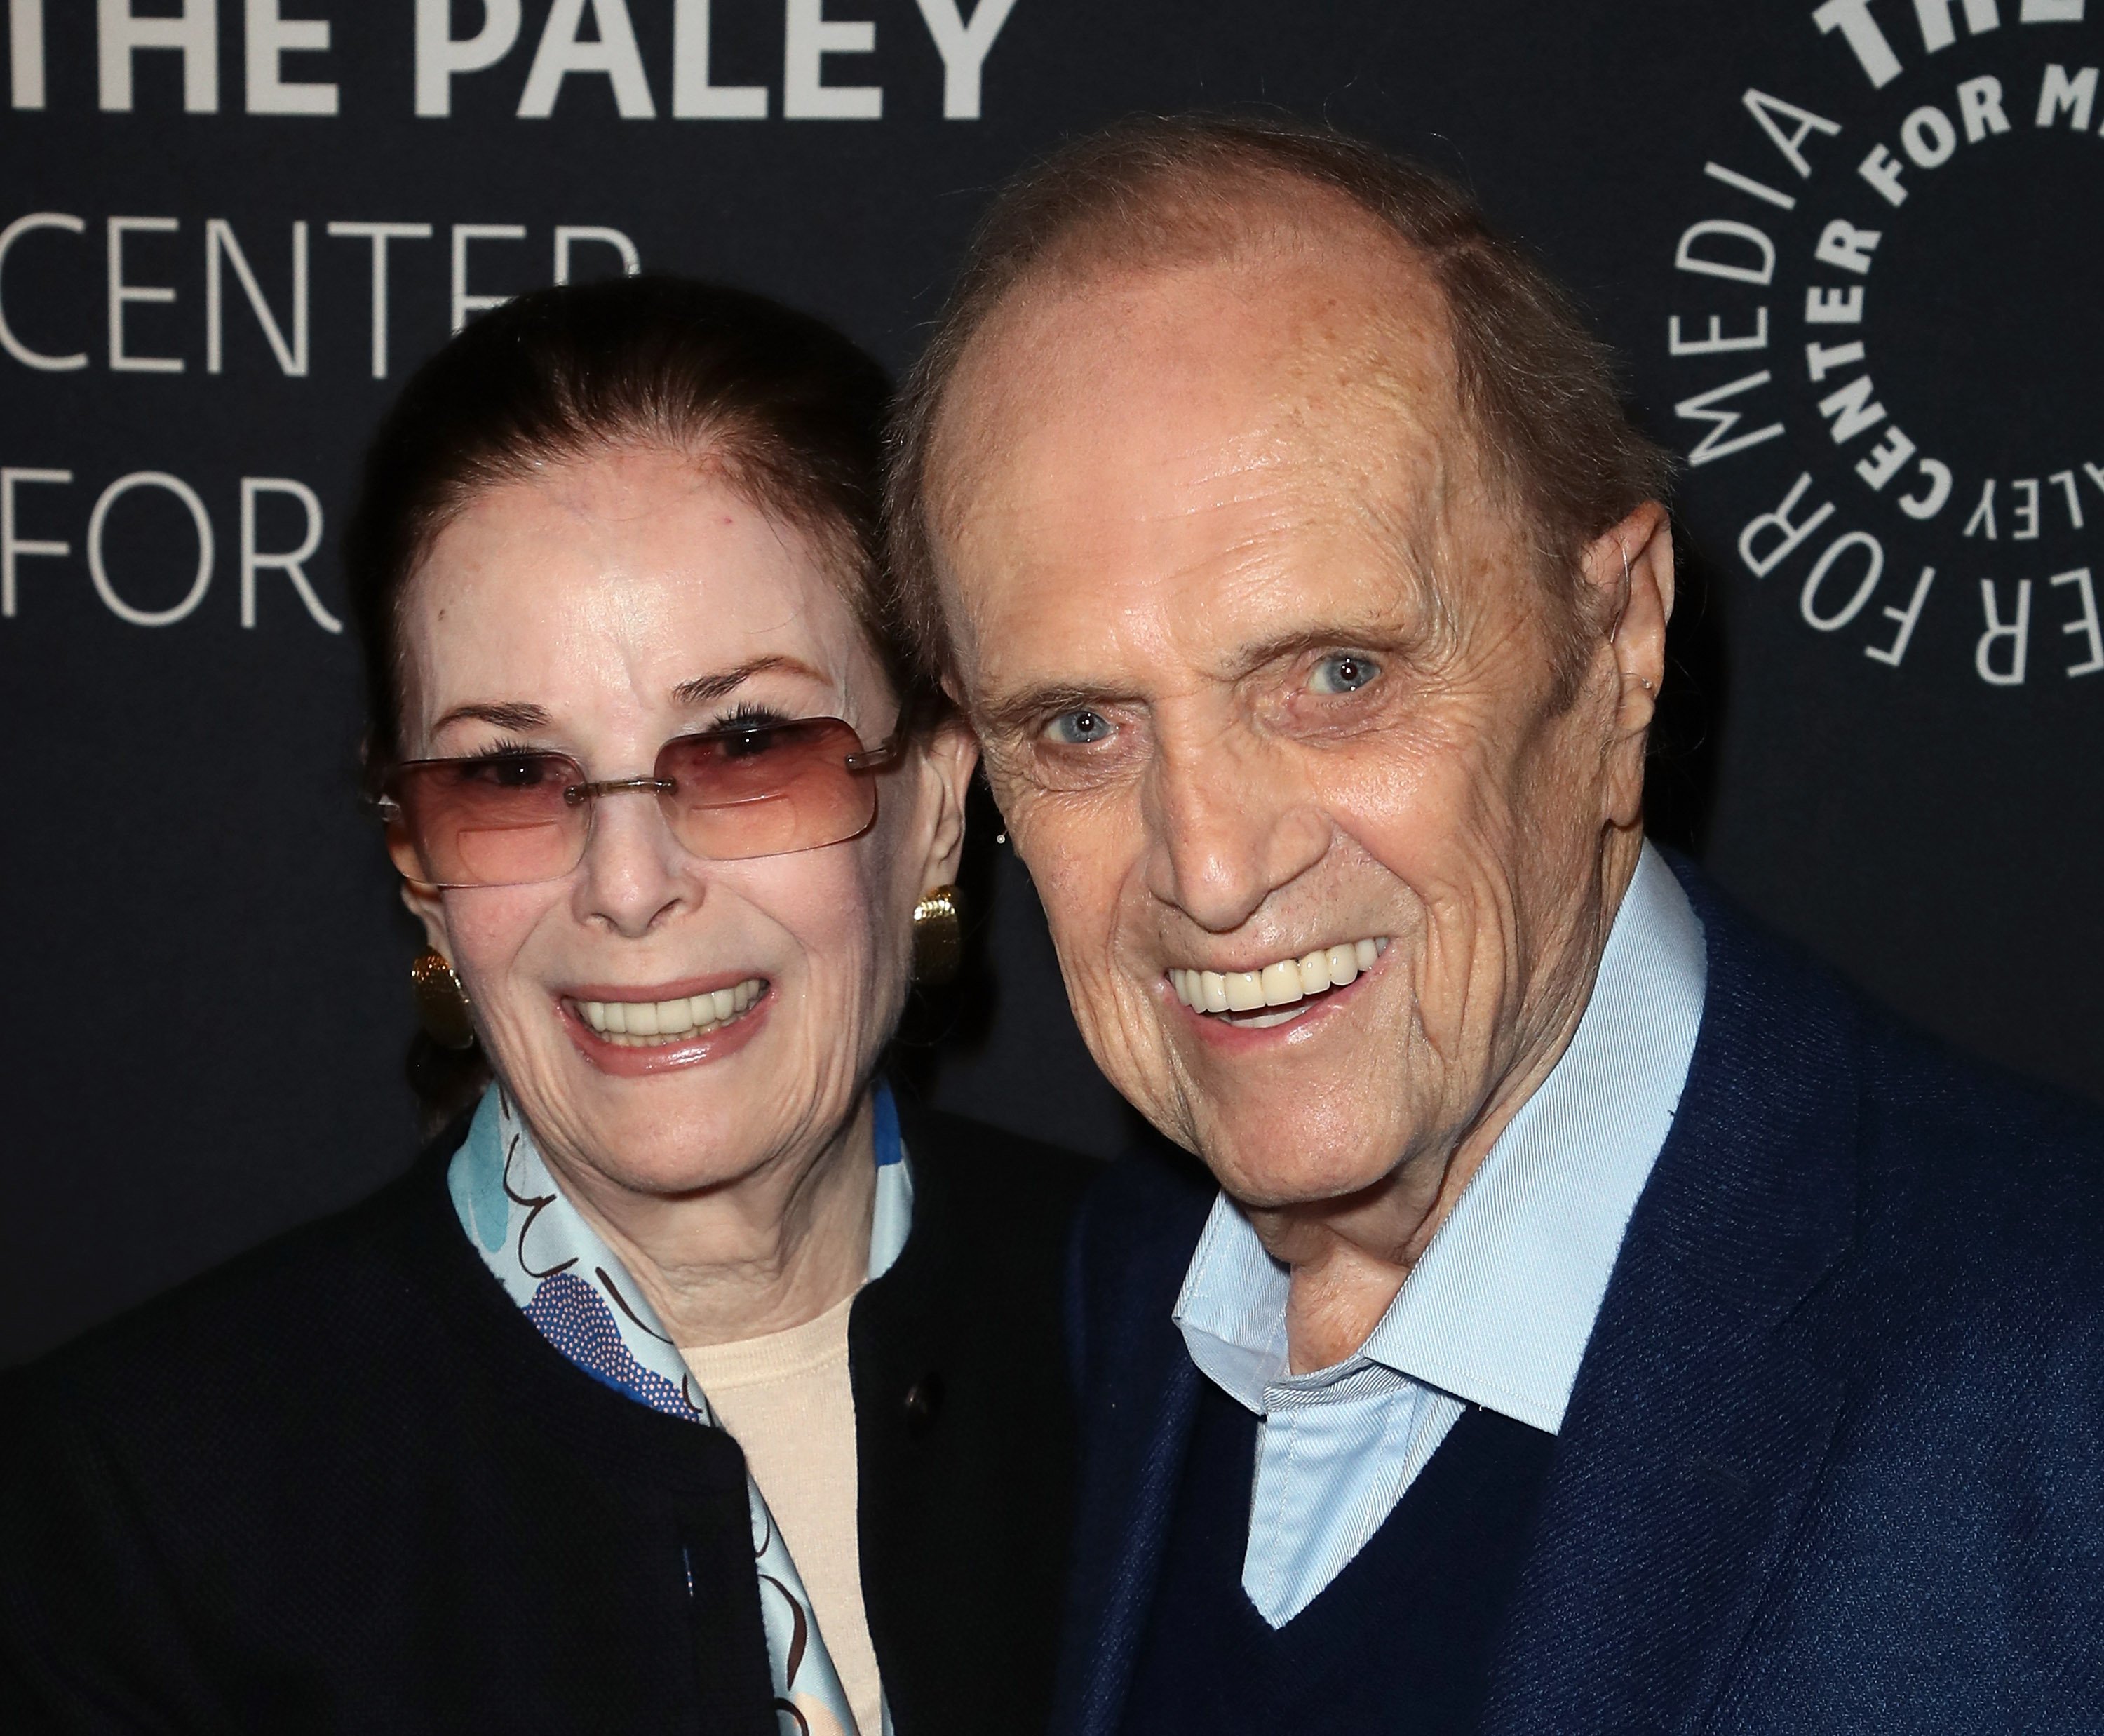 Bob Newhart (R) and wife Ginny Newhart attend An Evening with Bob Newhart: A "Newhart" Celebration presented by The Paley Center for Media and Hulu at The Paley Center for Media on April 26, 2018 in Beverly Hills, California | Source: Getty Images 